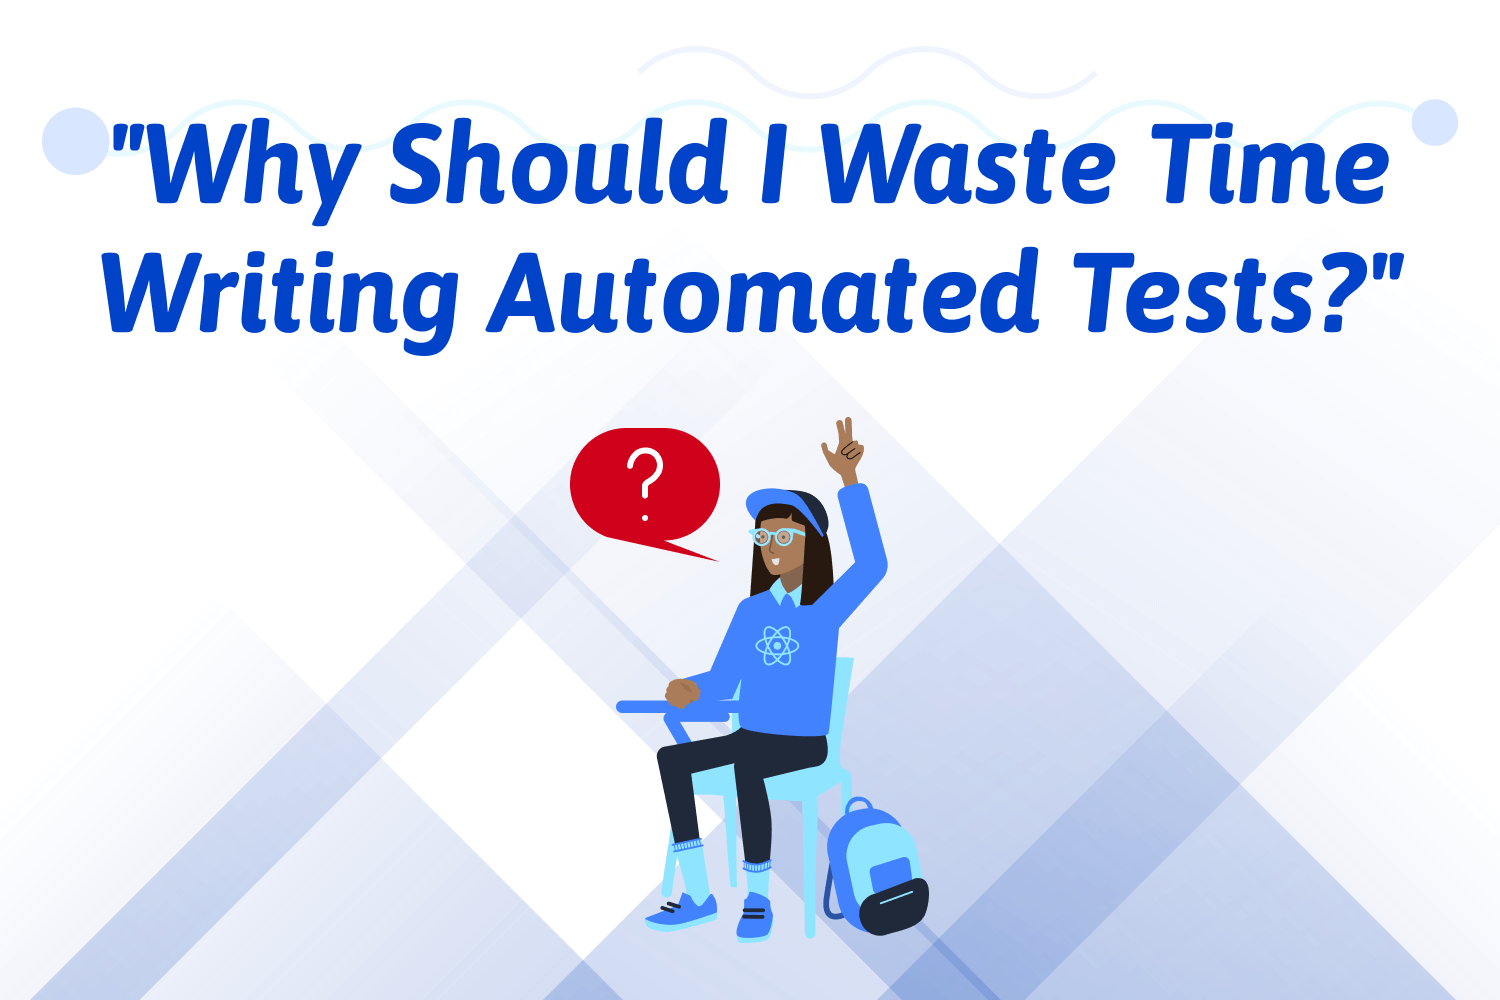 "Why Should I Waste Time Writing Automated Tests?"